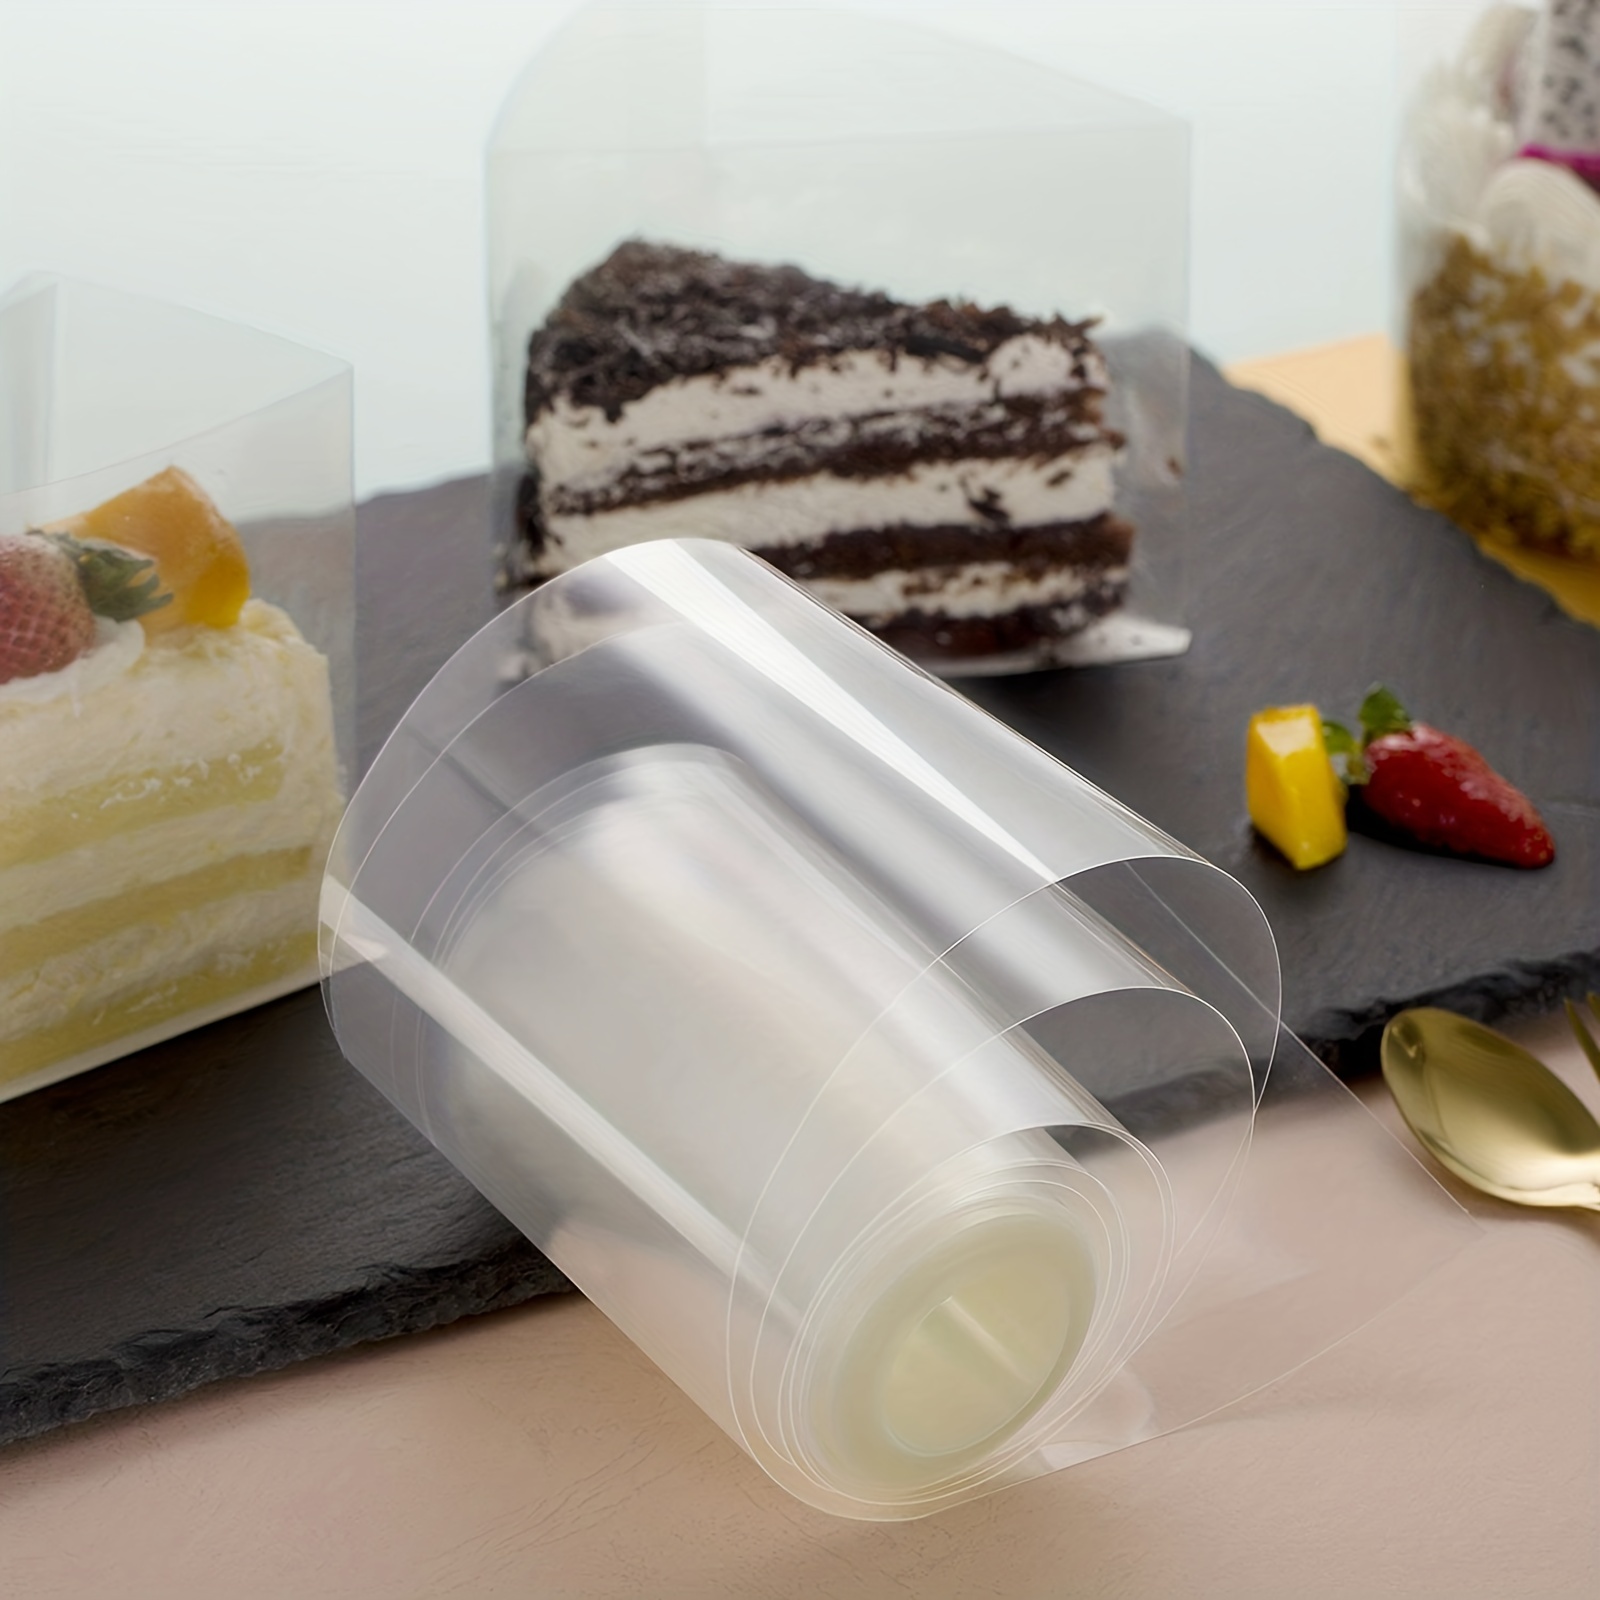 Cake Collars 6.3 x 394 inch, Mousse Cake Acetate Sheets for Baking, Transparent Cake Rolls, Clear Cake Strips, Chocolate Mousse Surrounding Edge